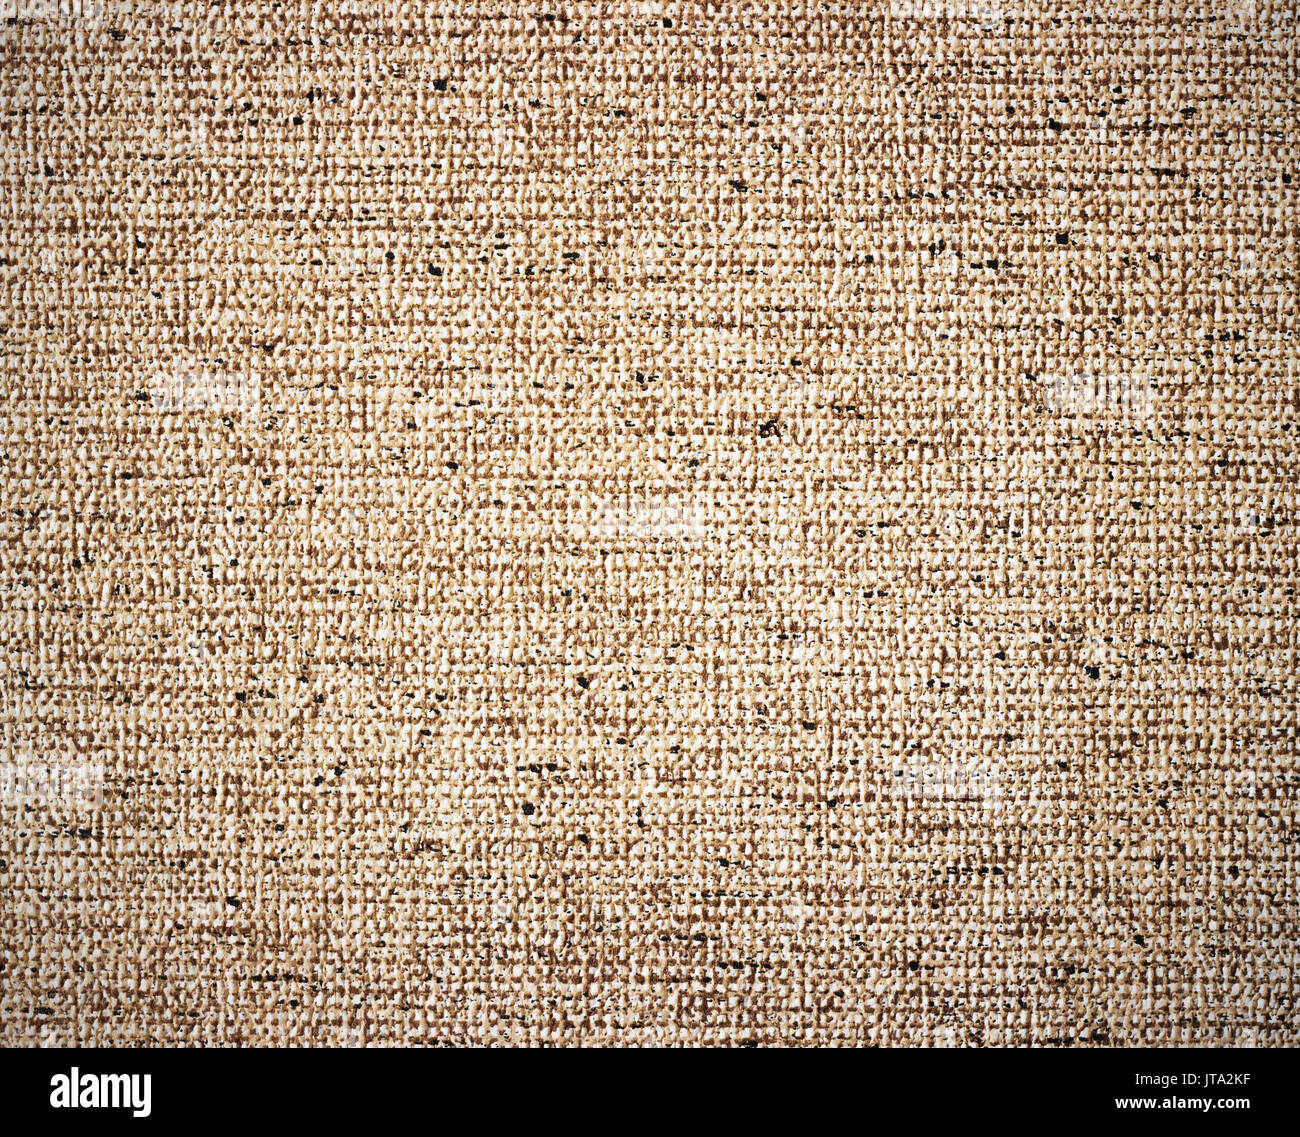 Old paper texture. Paper background Brown color Stock Photo